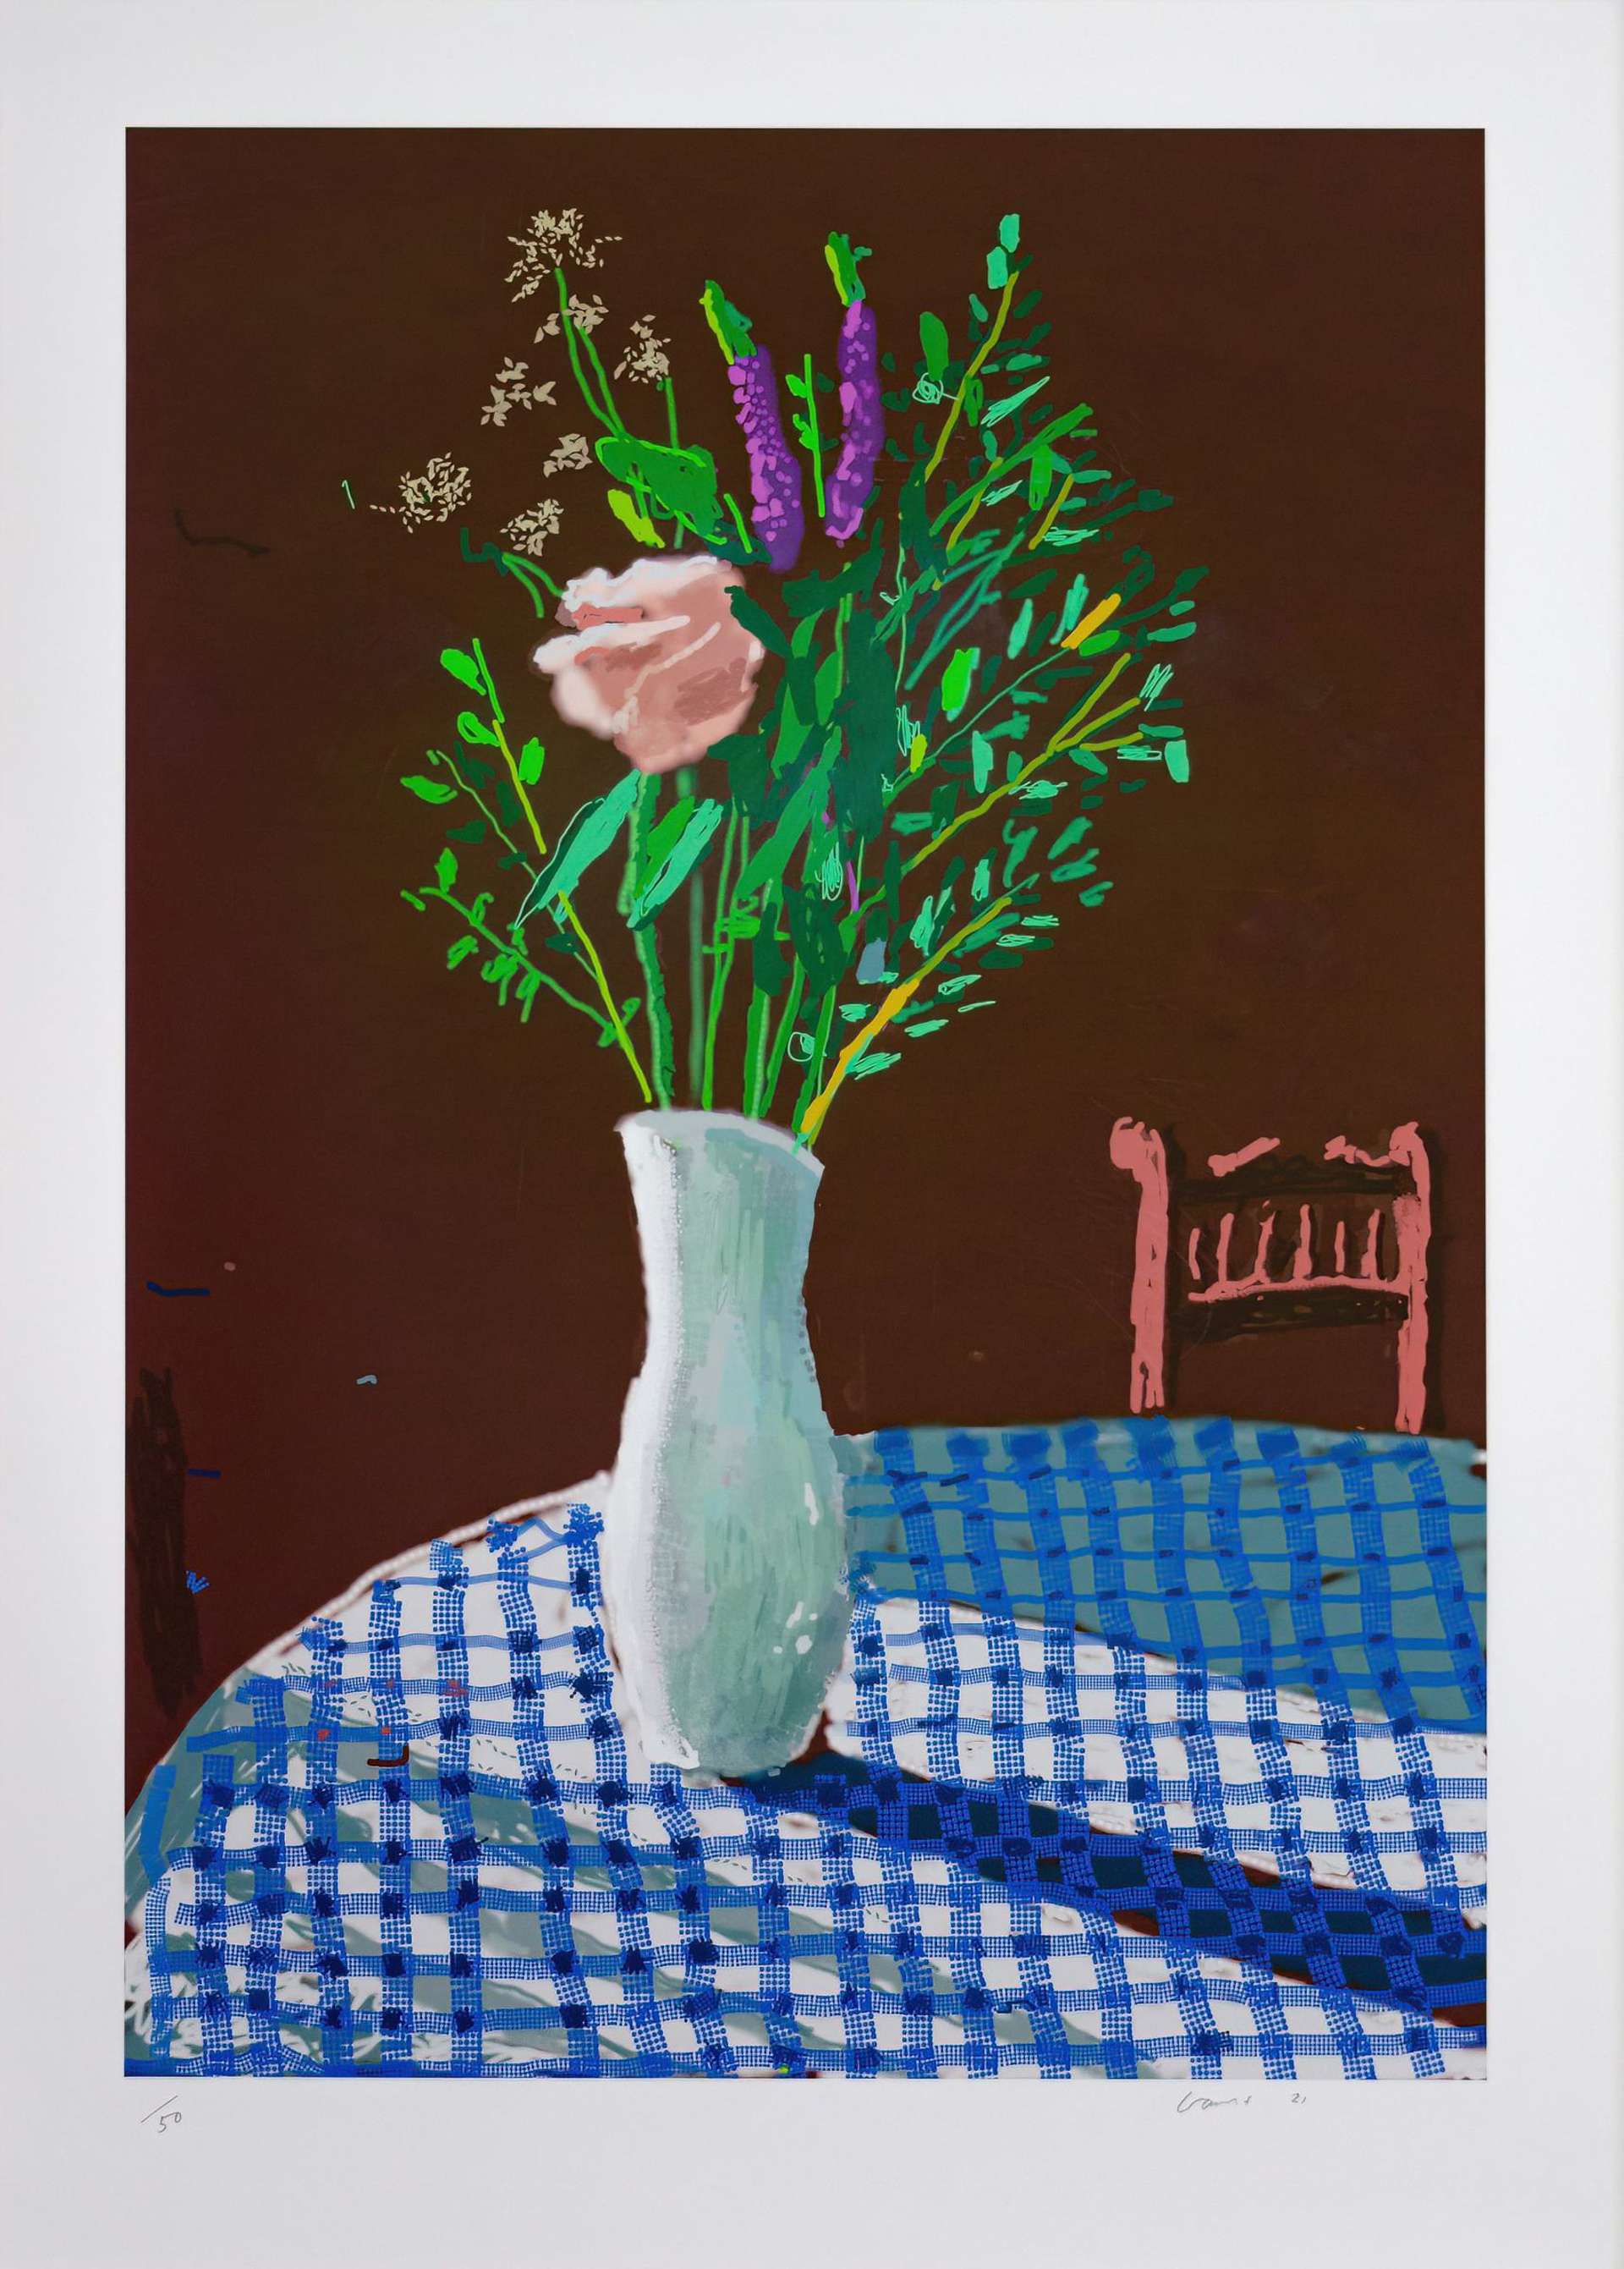 4th February 2021, Flowers In White Vase With Chair - Signed Print by David Hockney 2021 - MyArtBroker